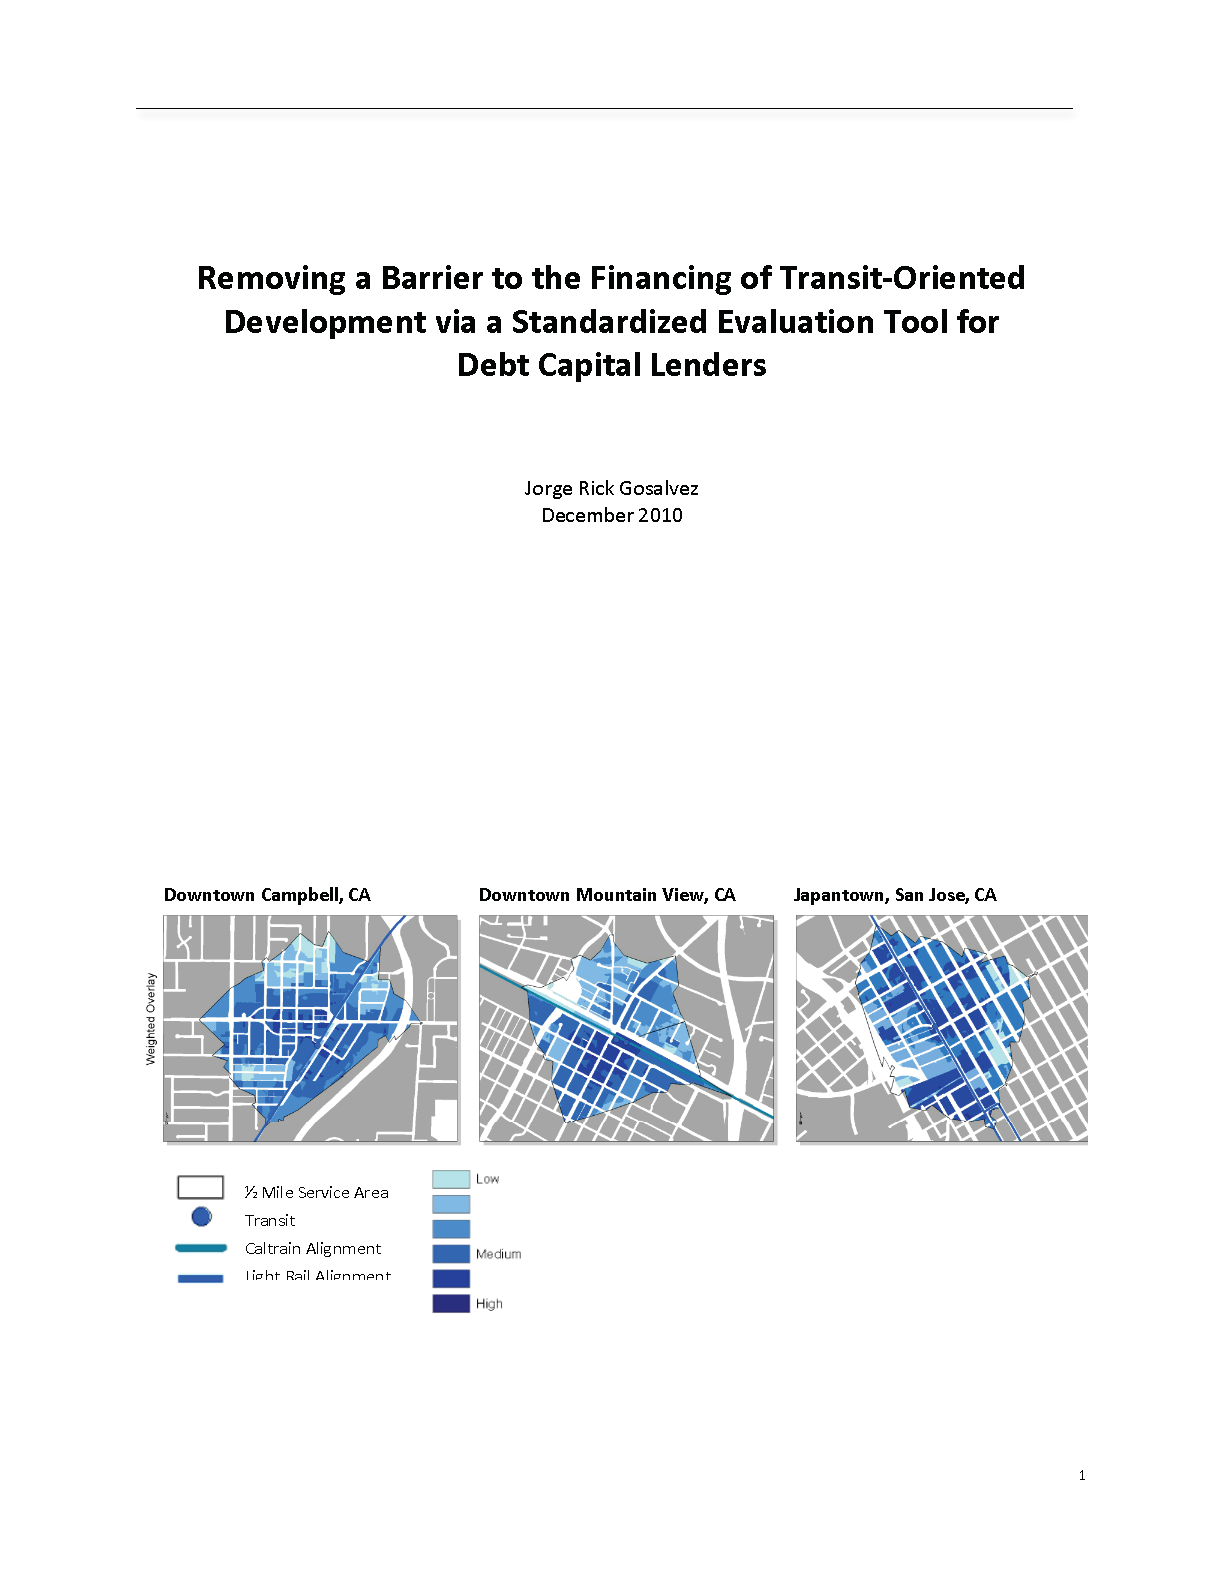 Removing a Barrier to the Financing of Transit-Oriented Development